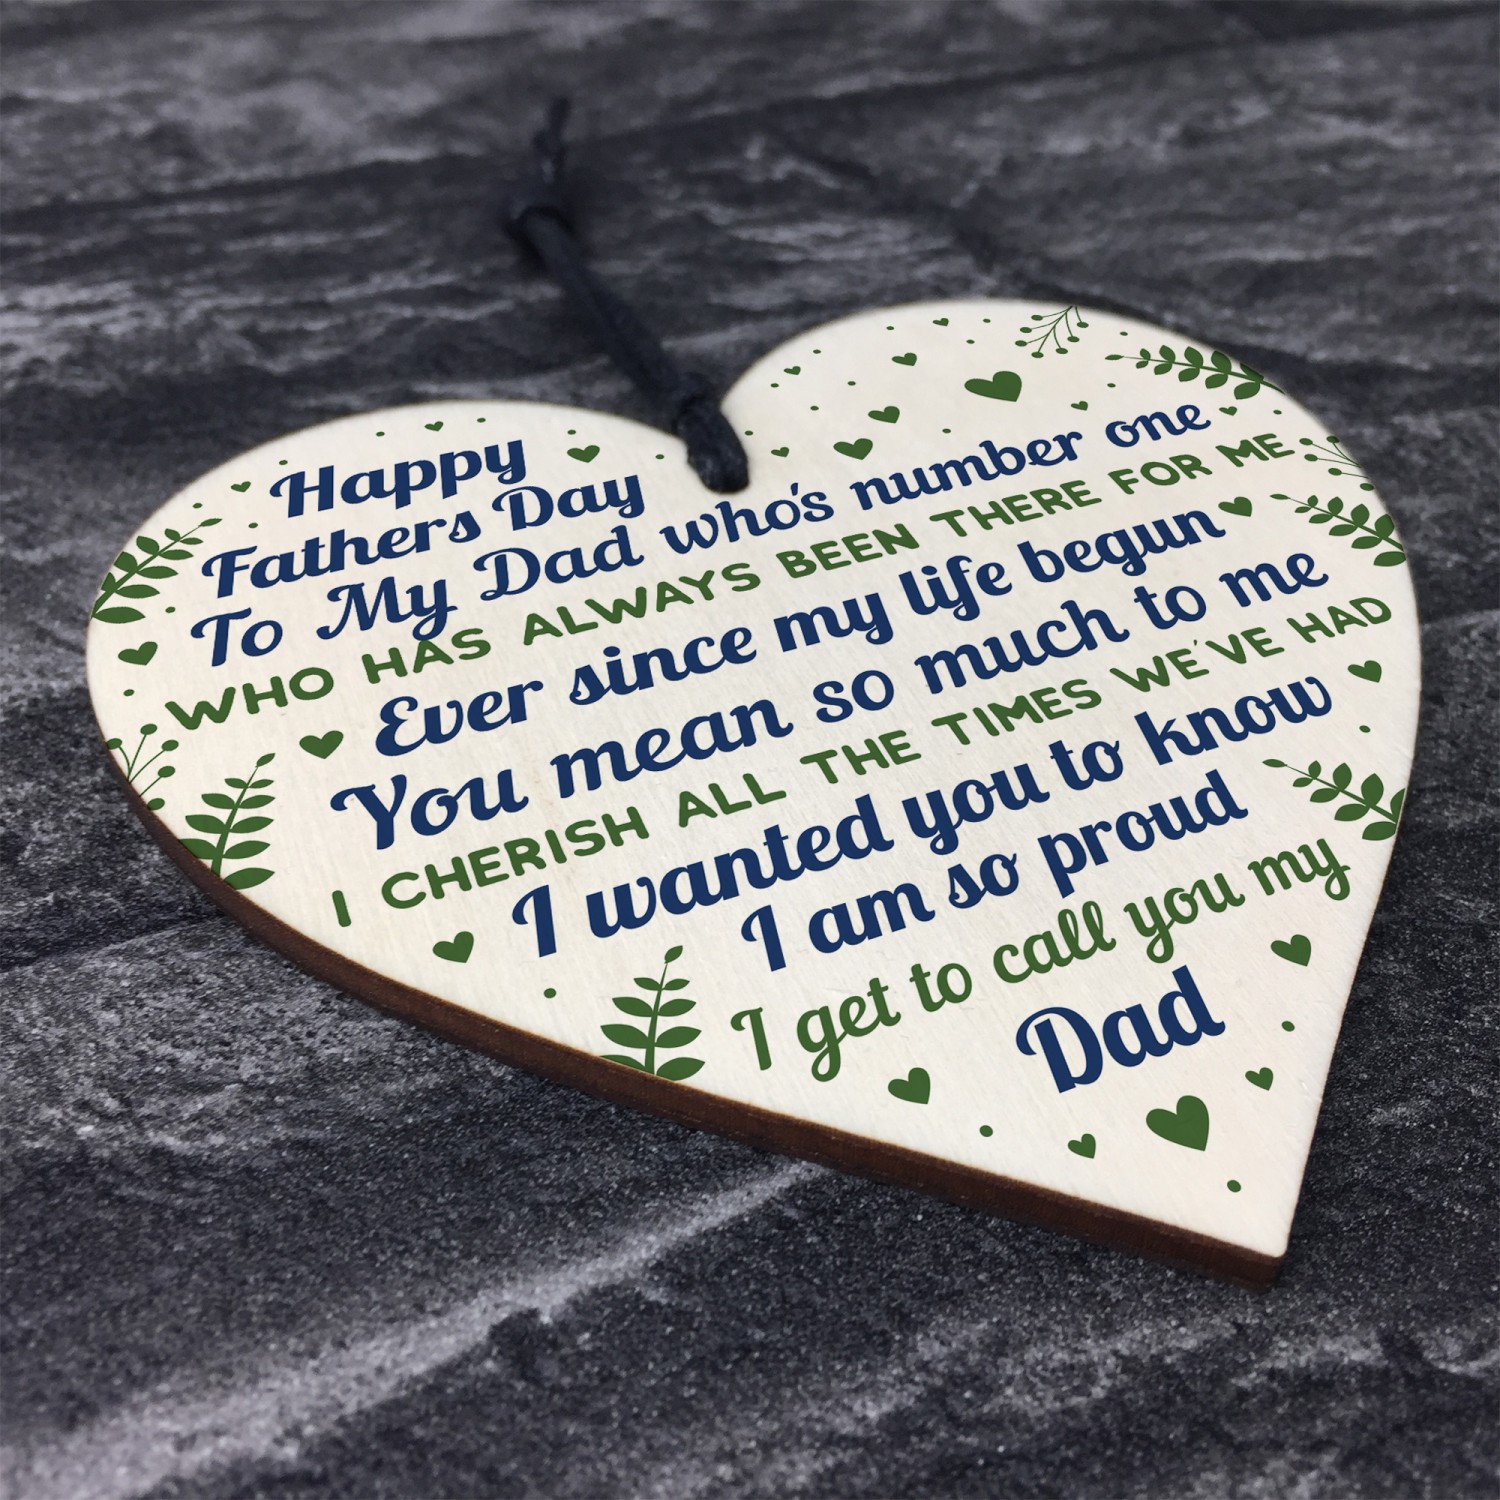 Dad Gifts - Best Dad Ever Gifts - Fathers Day Gift - Dad Gifts From Daughter  - Gifts For Dad On Fathers Day - Fathers Day Gift From Daughter - Best Dad